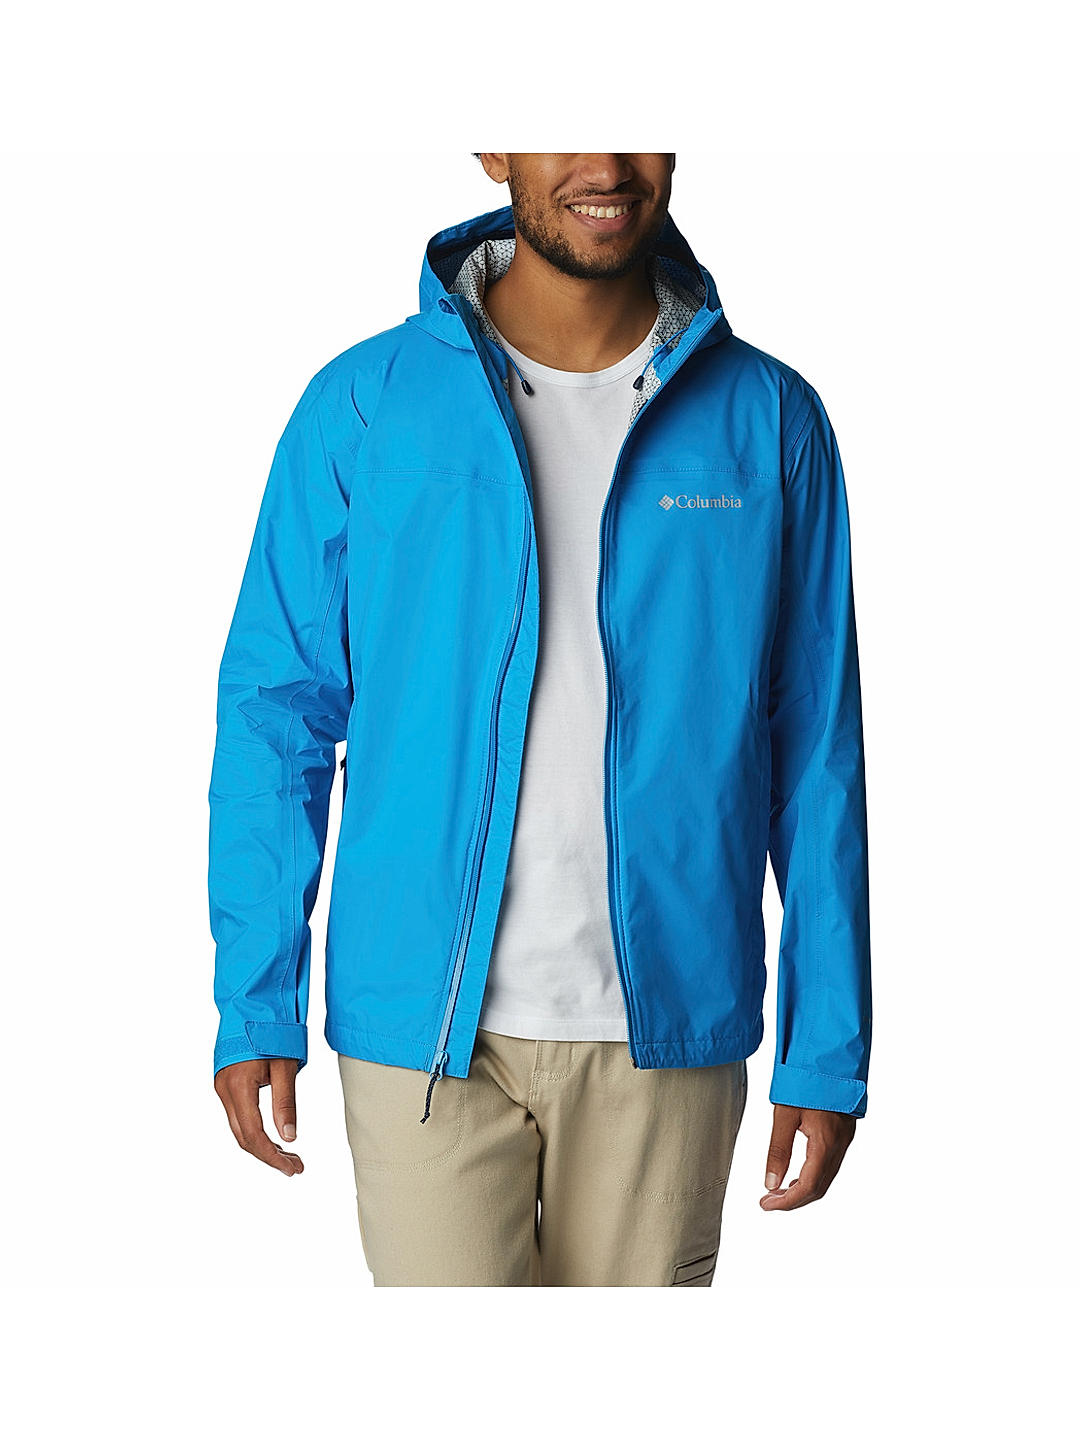 Buy Blue Evapouration Jacket for Men Online at Columbia Sportswear | 500806